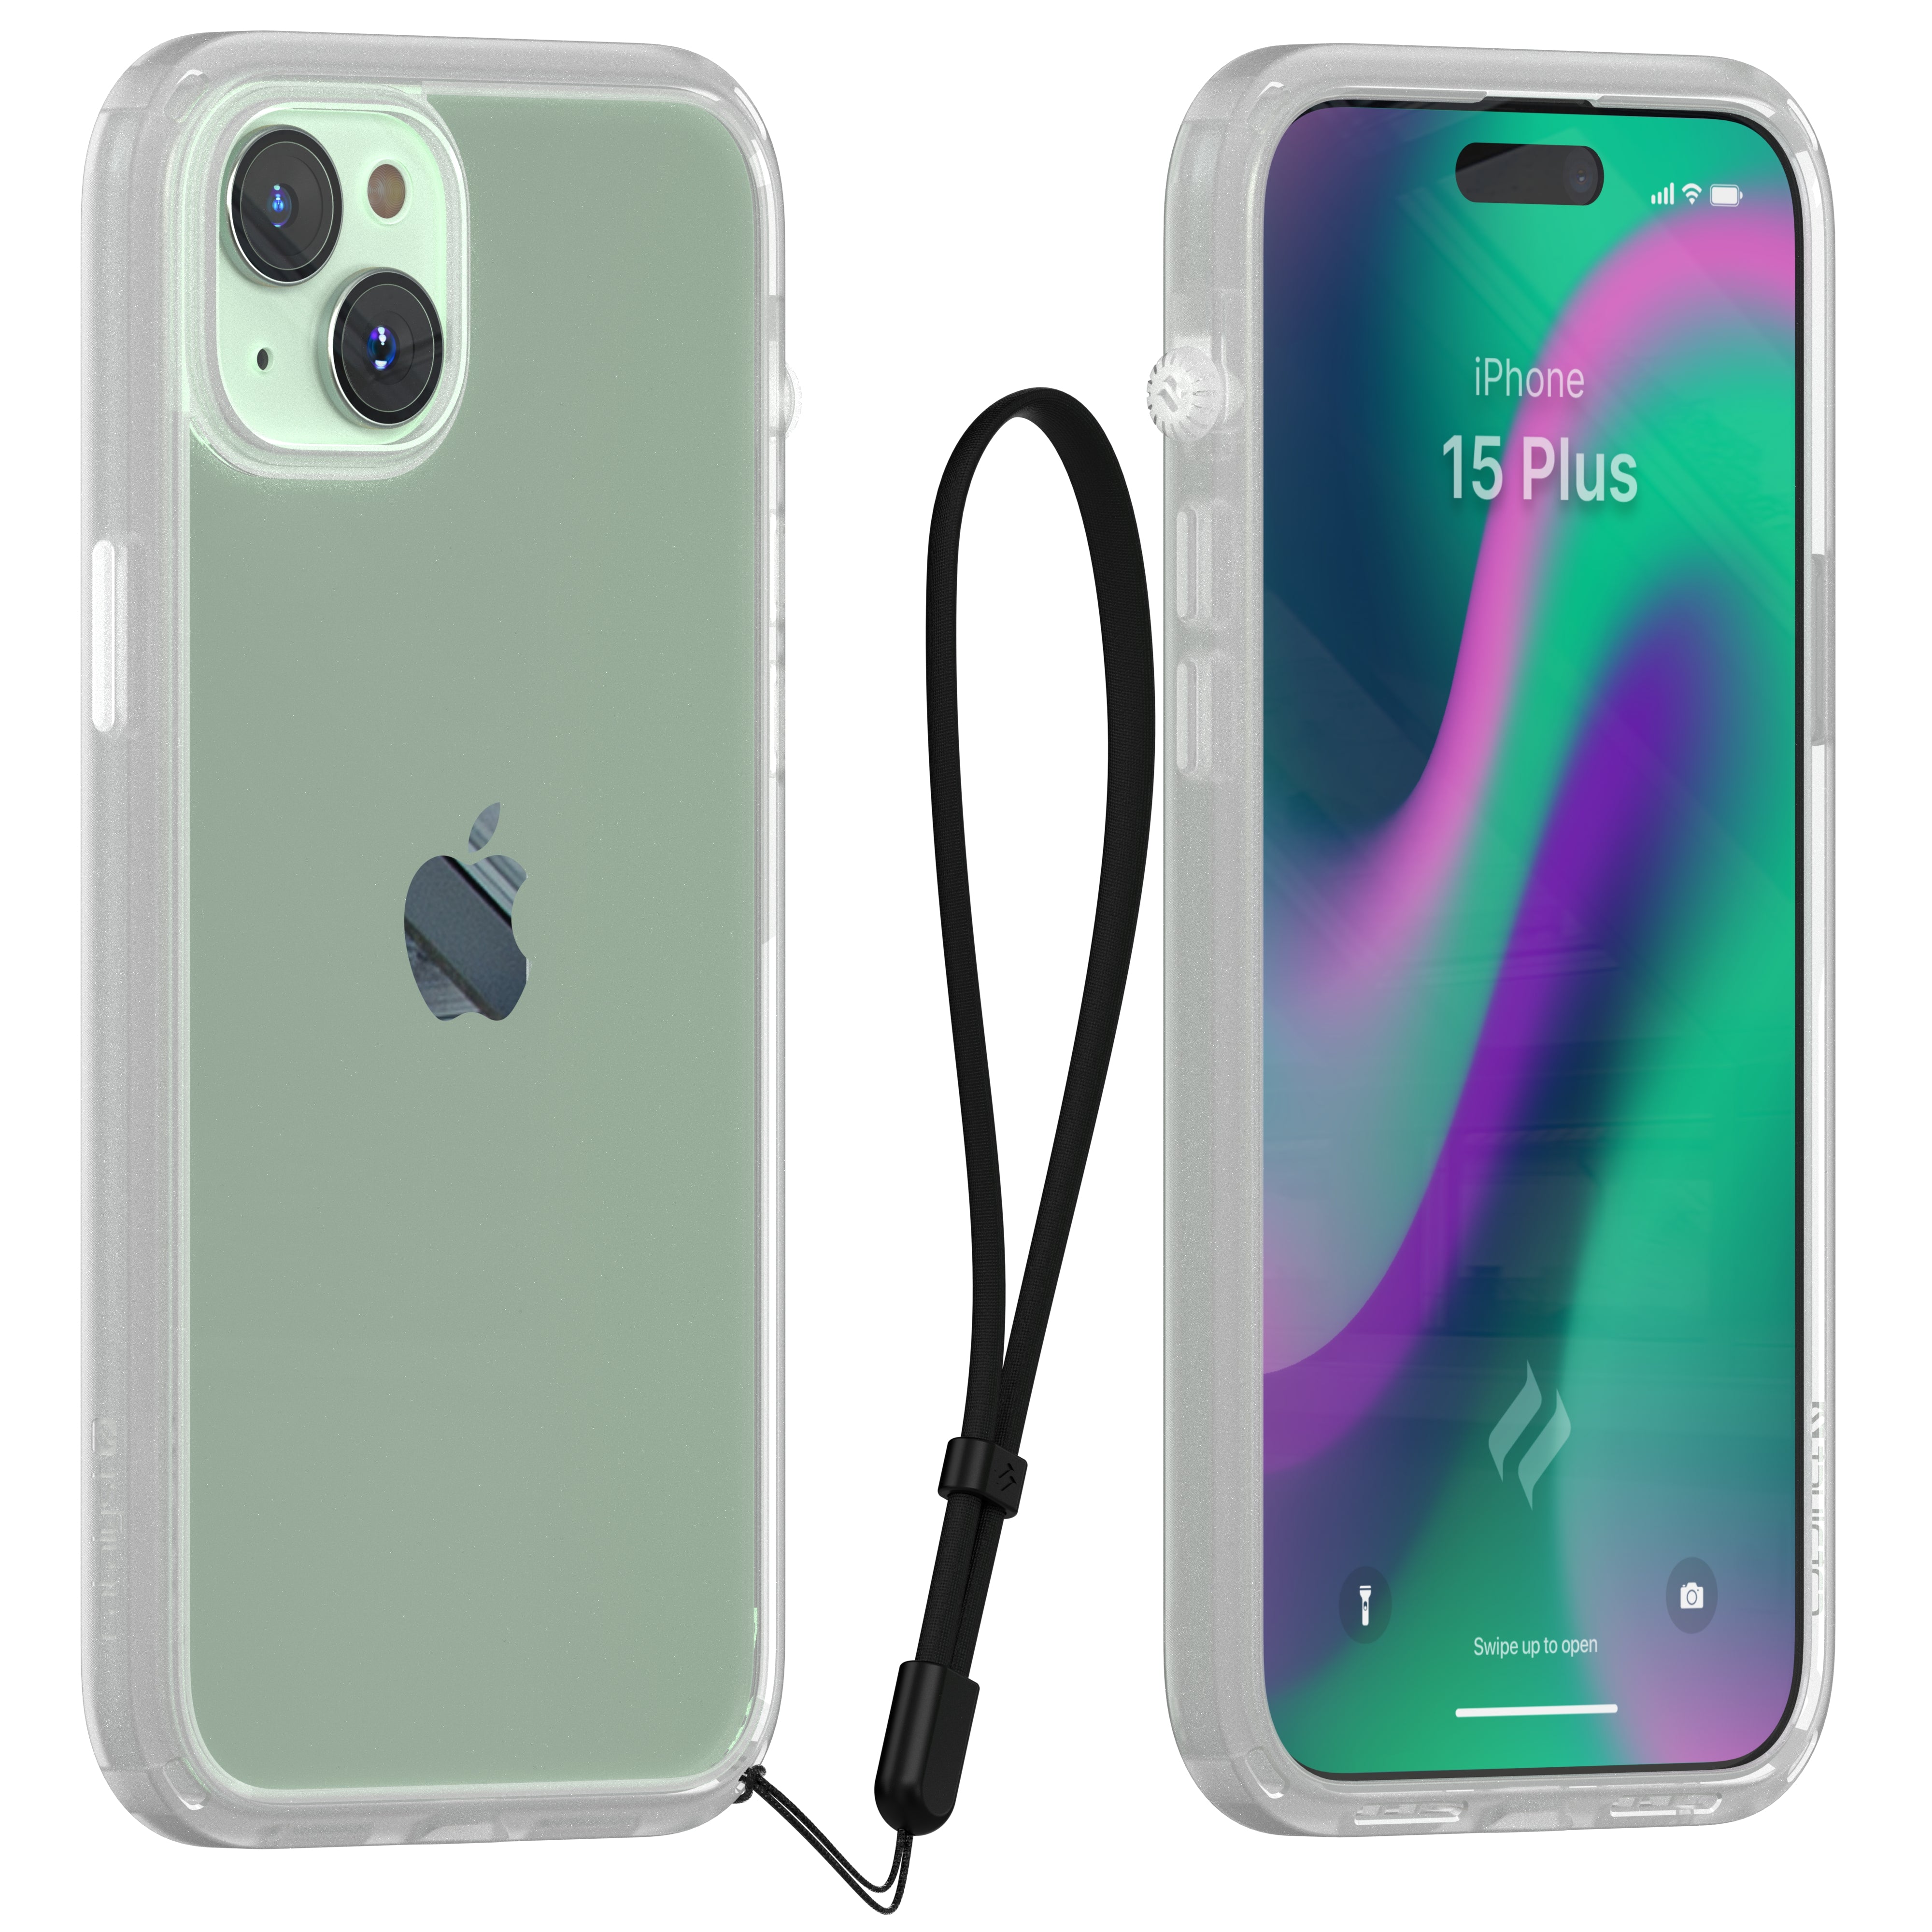 Catalyst iphone 15 series influence case iphone 15 pro in clear colorway showing the back and front view of the case with lanyard